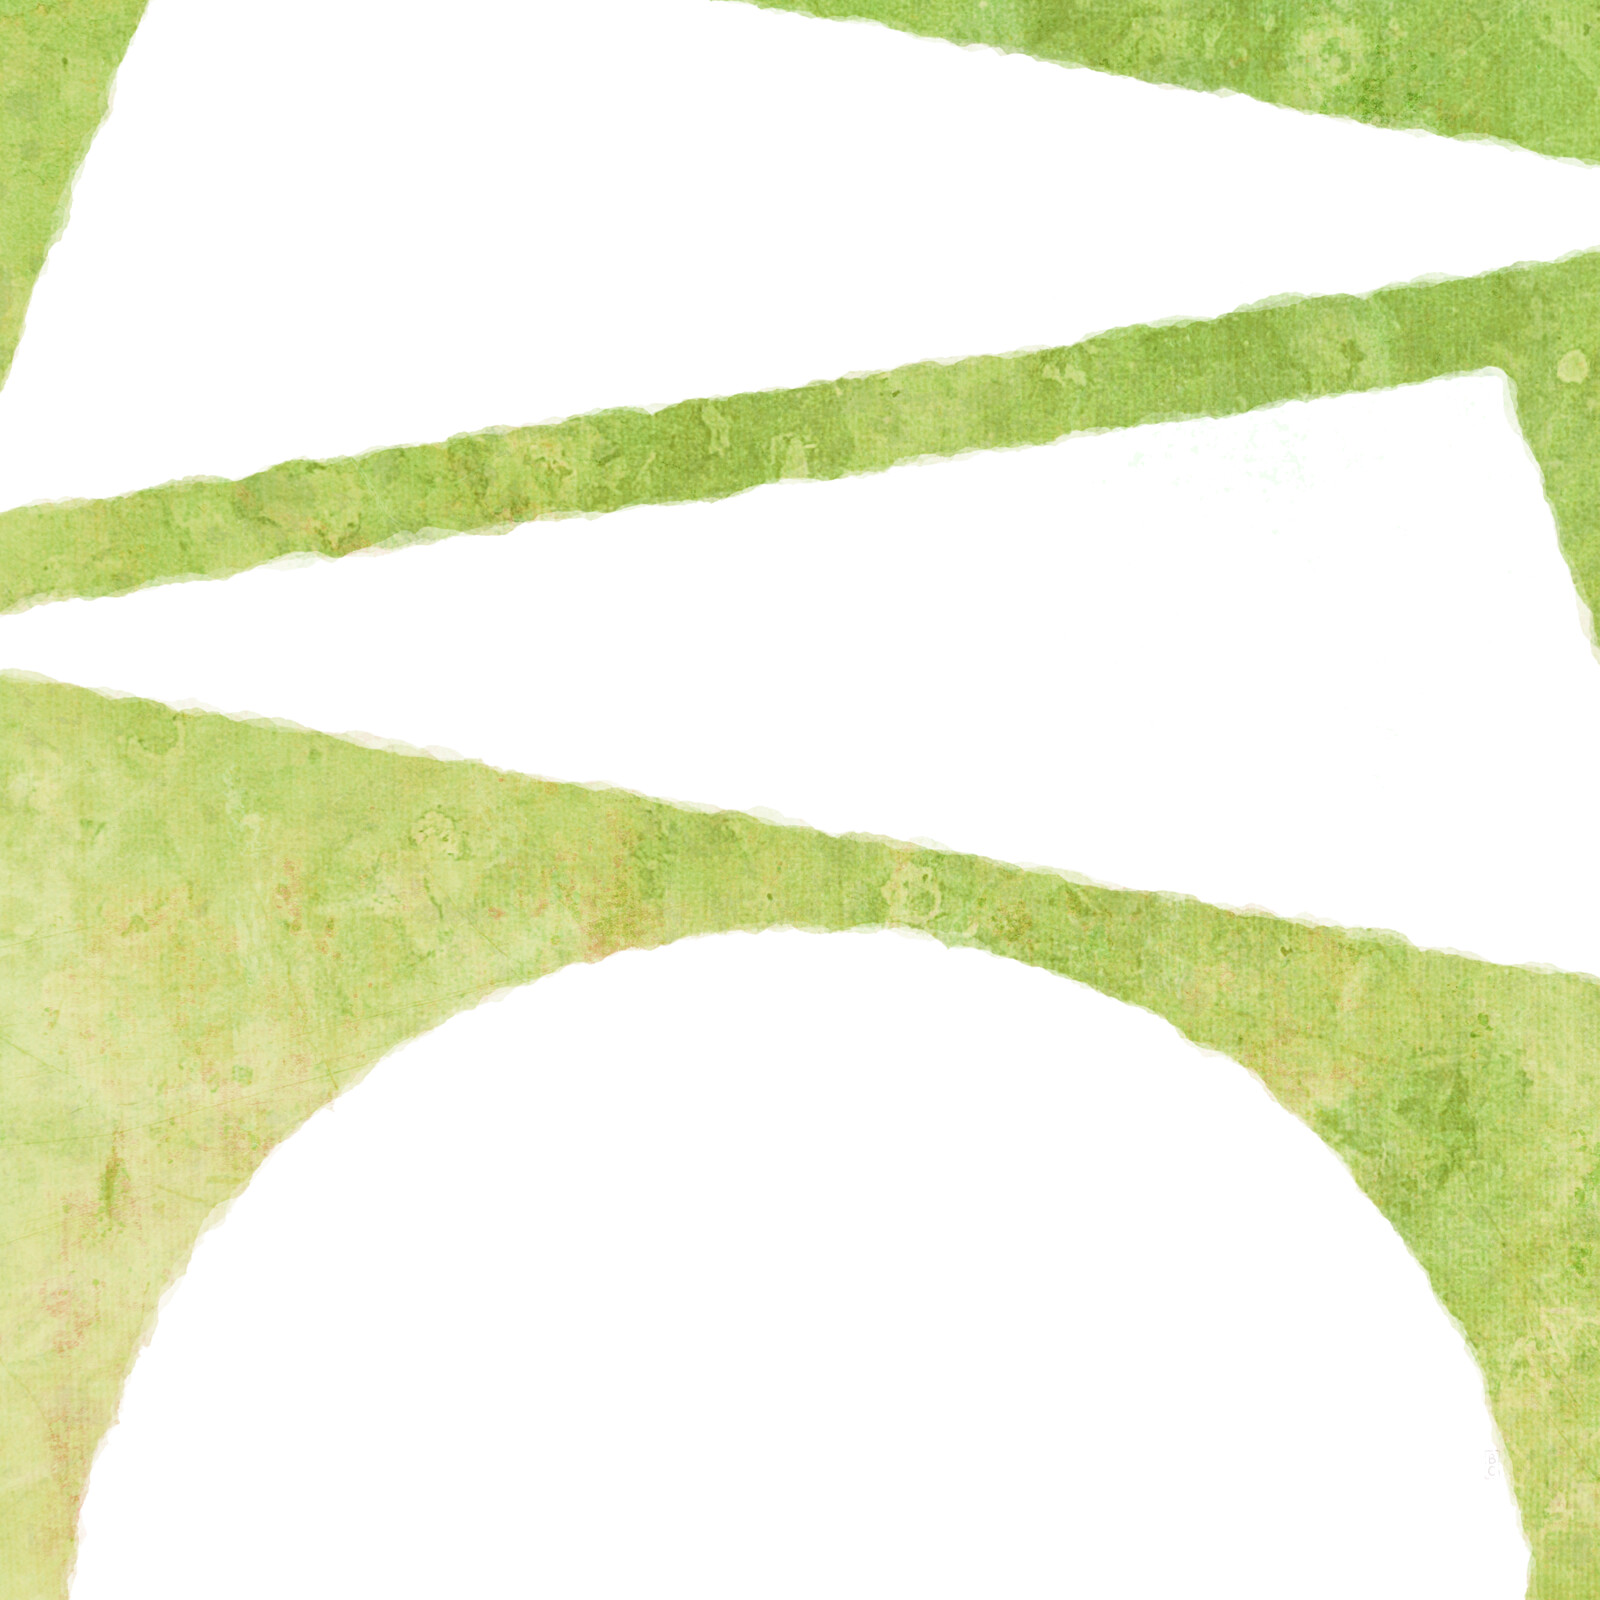 A large white circle with two white triangles above it, on a green background.